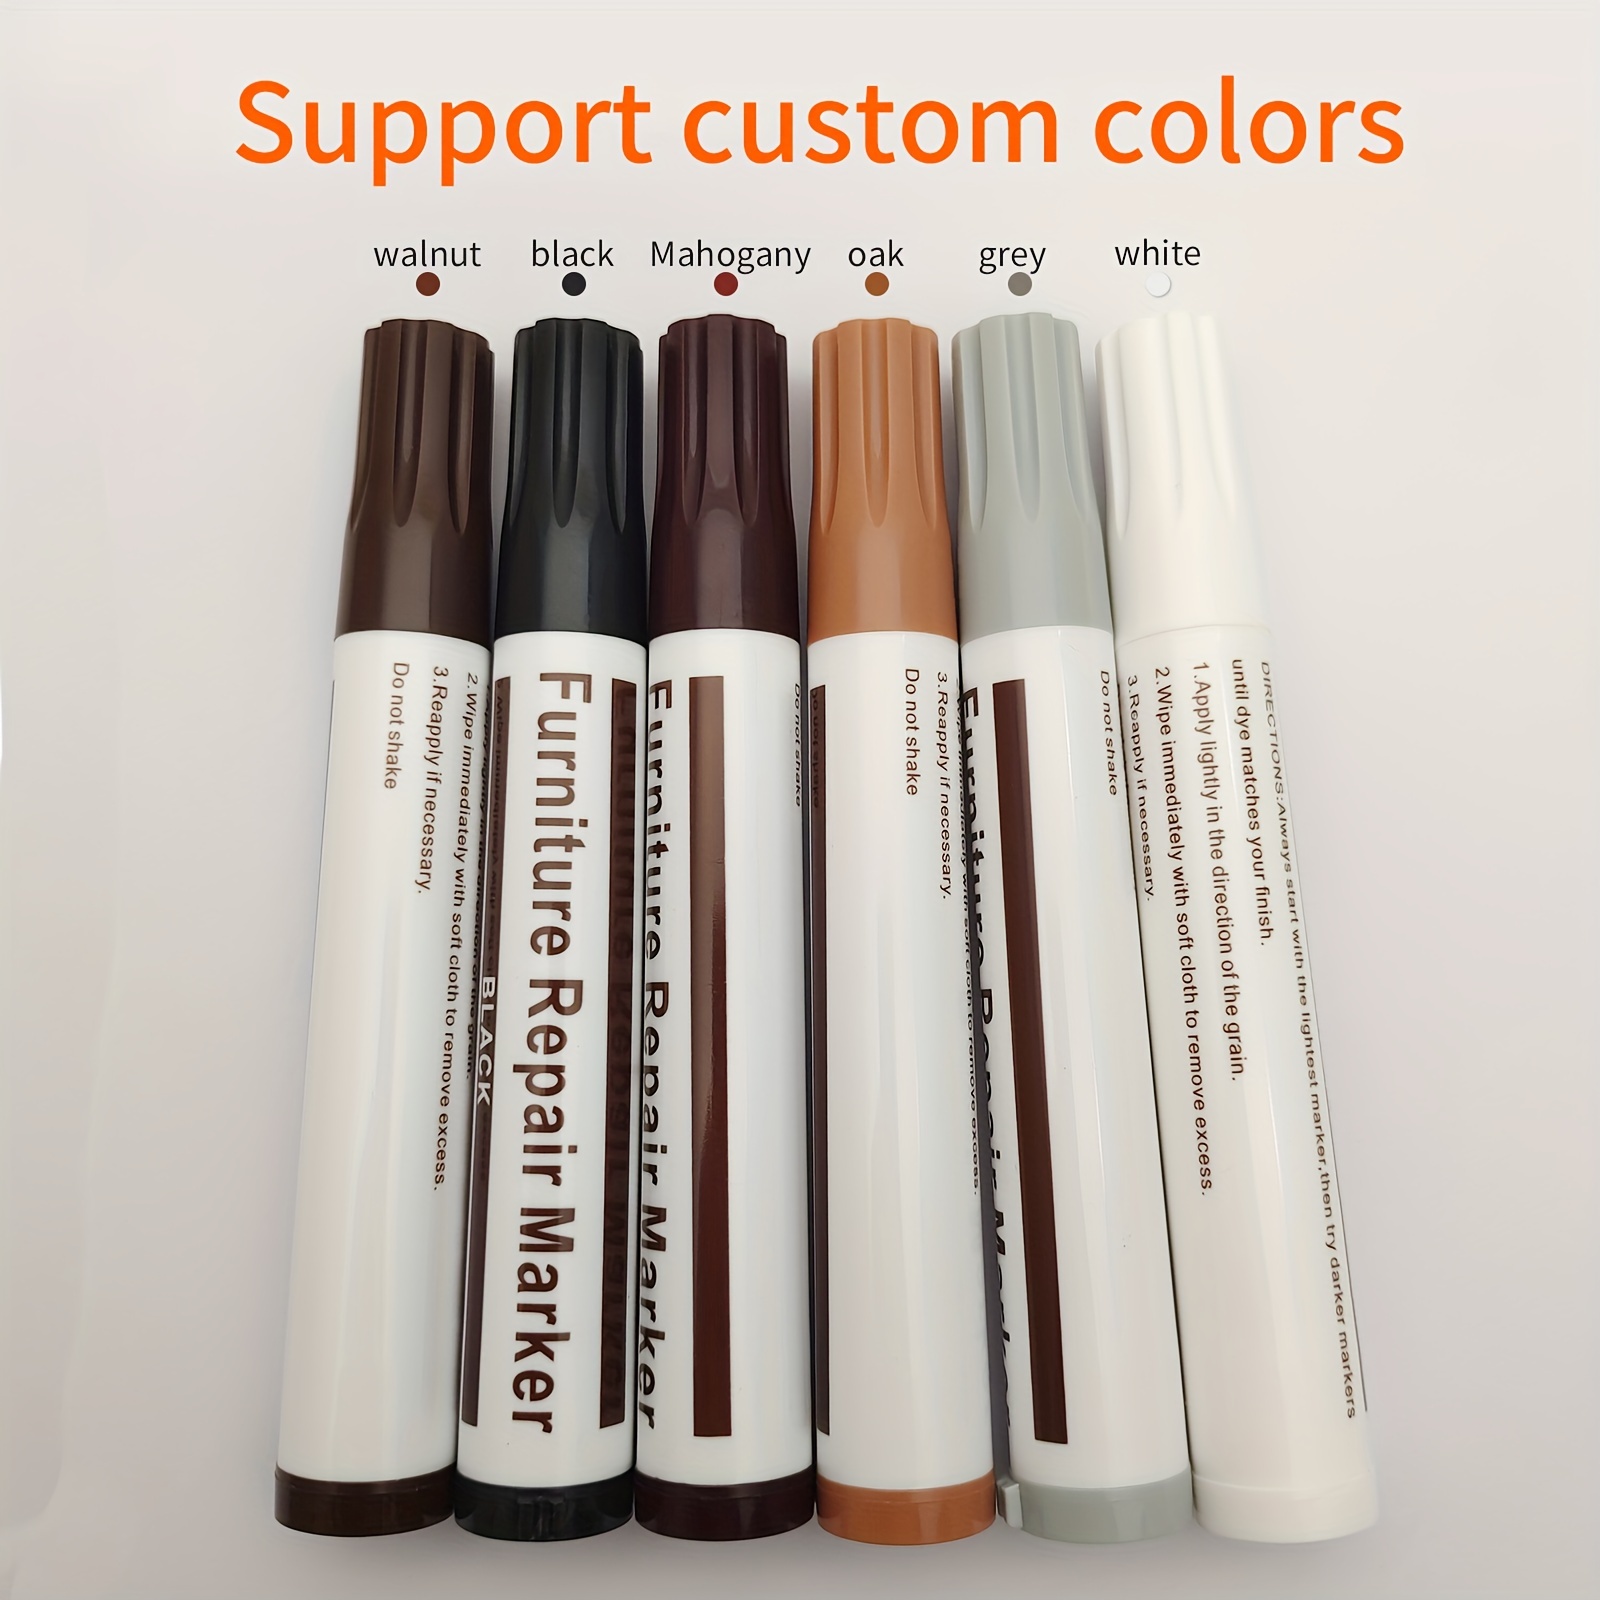 Leopong Touch Up Paint Pen-Fillable Paint Pen-Paint Brush Pens for Walls  Repair, Furniture Repair Kit for Drywall, Cabinets, Floors, Windows, Doors